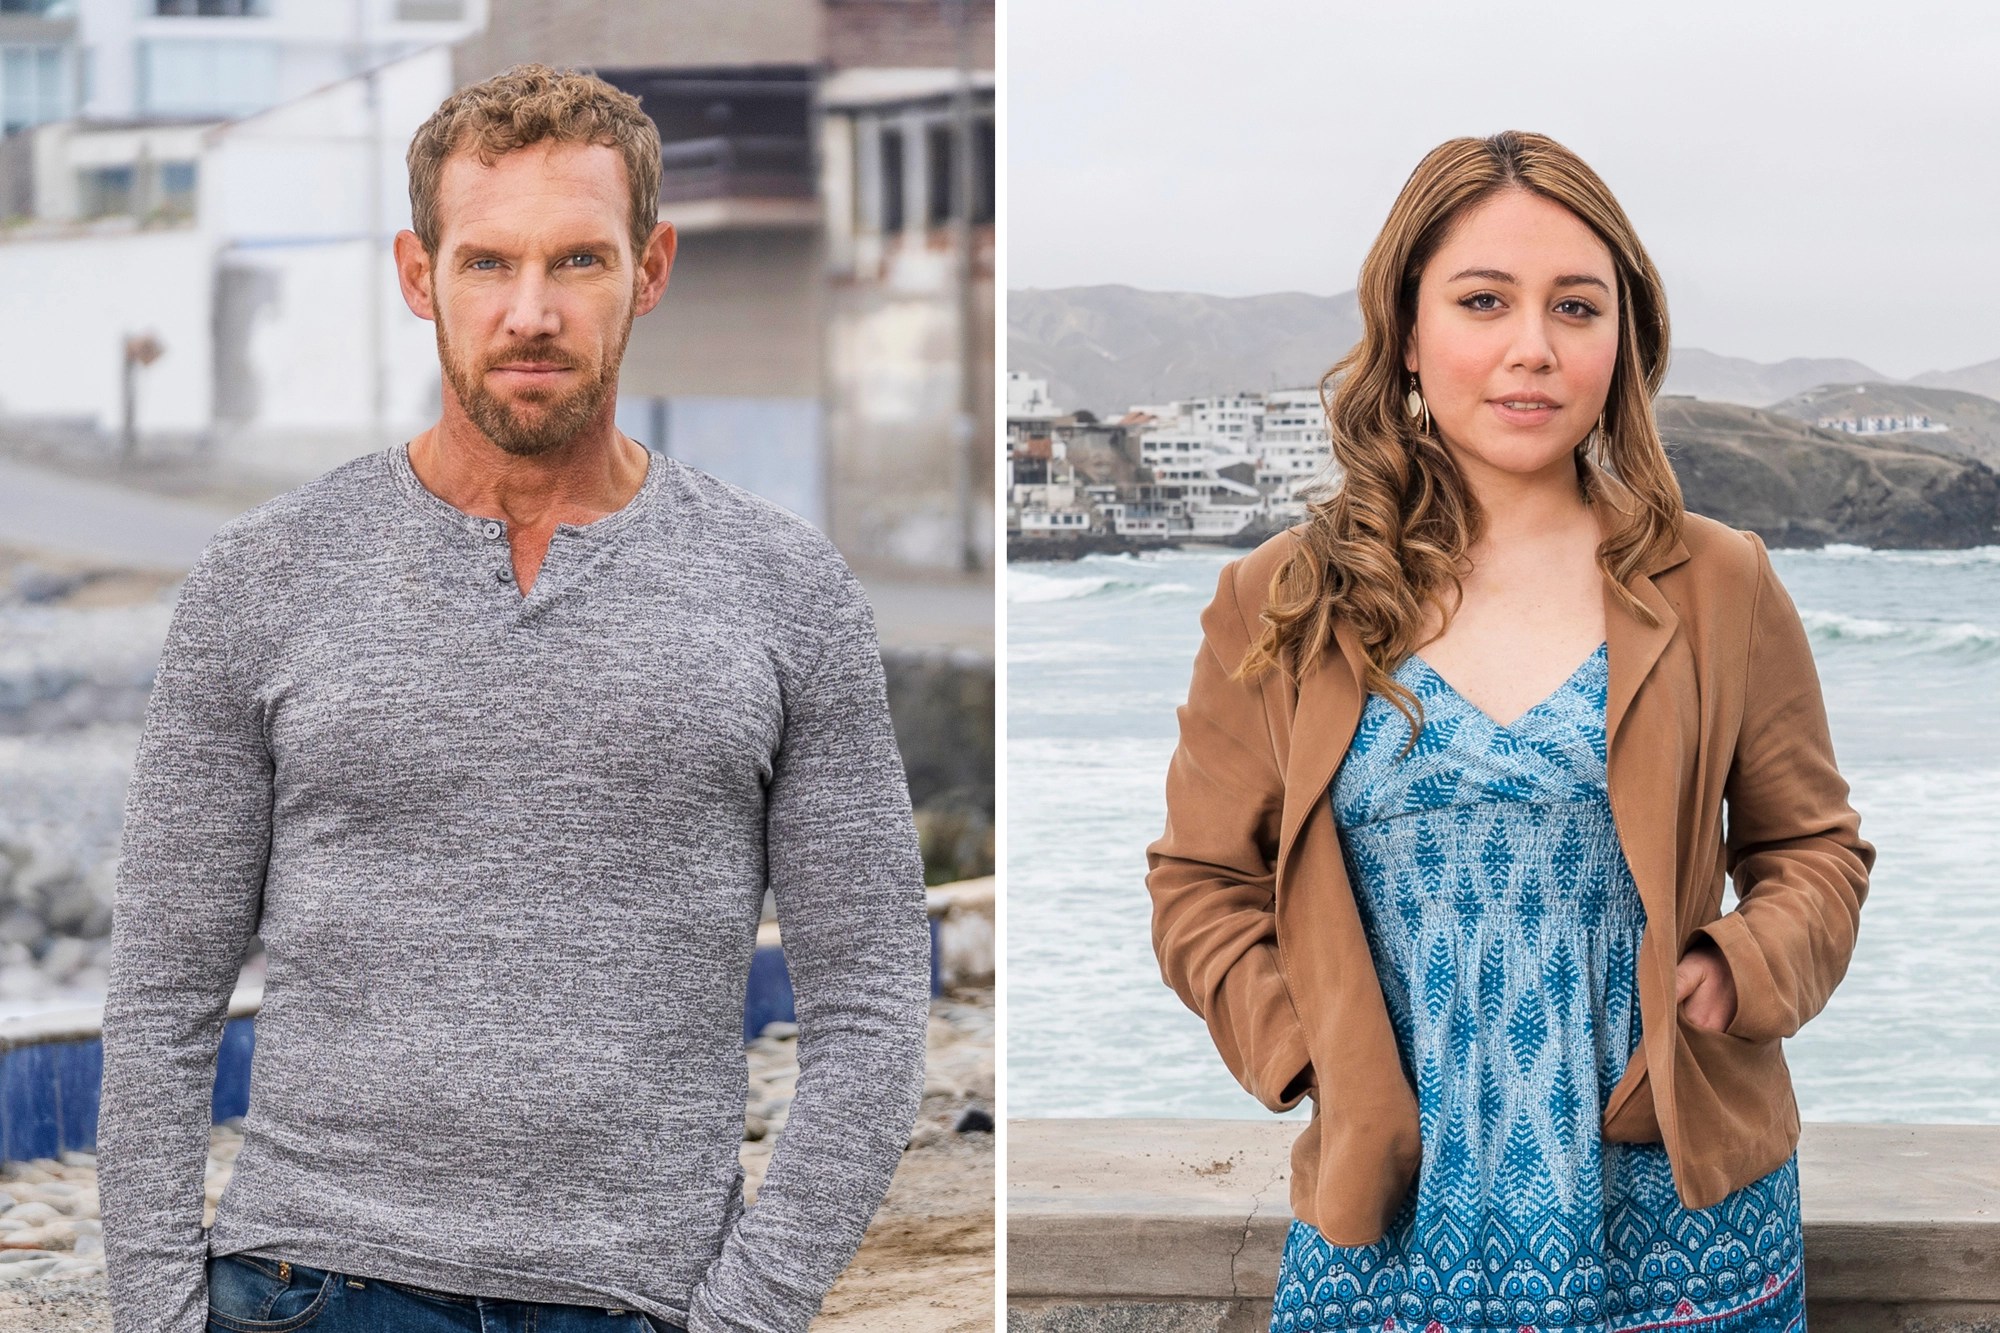 ’90 Day Fiancé: Before the 90 Days’ stars Ben and Mahogany pose for promotional portraits in San Bartolo, near Lima, Peru on TLC.